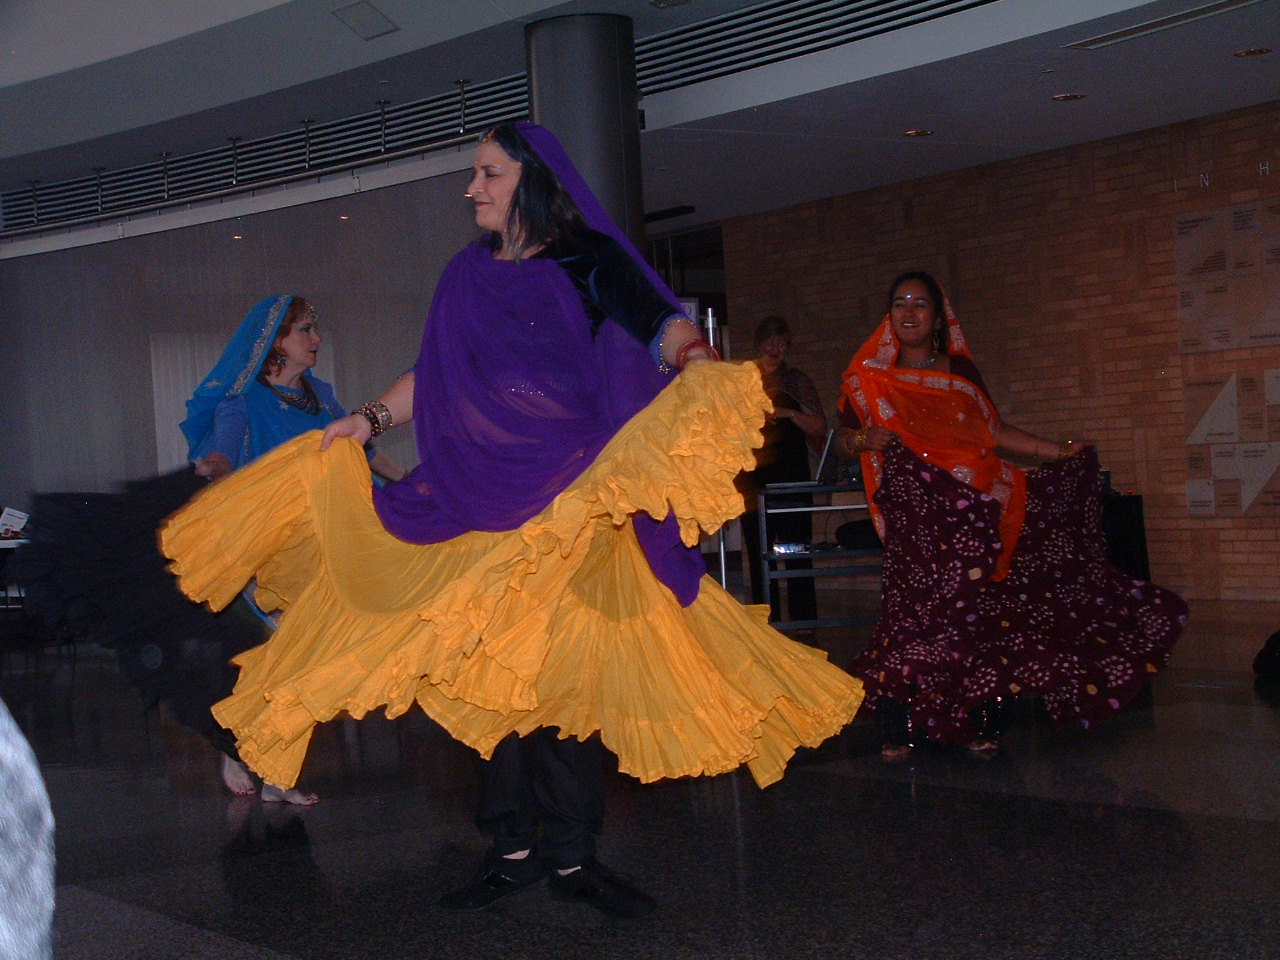 An Indian dance troupe performs at a Friends event